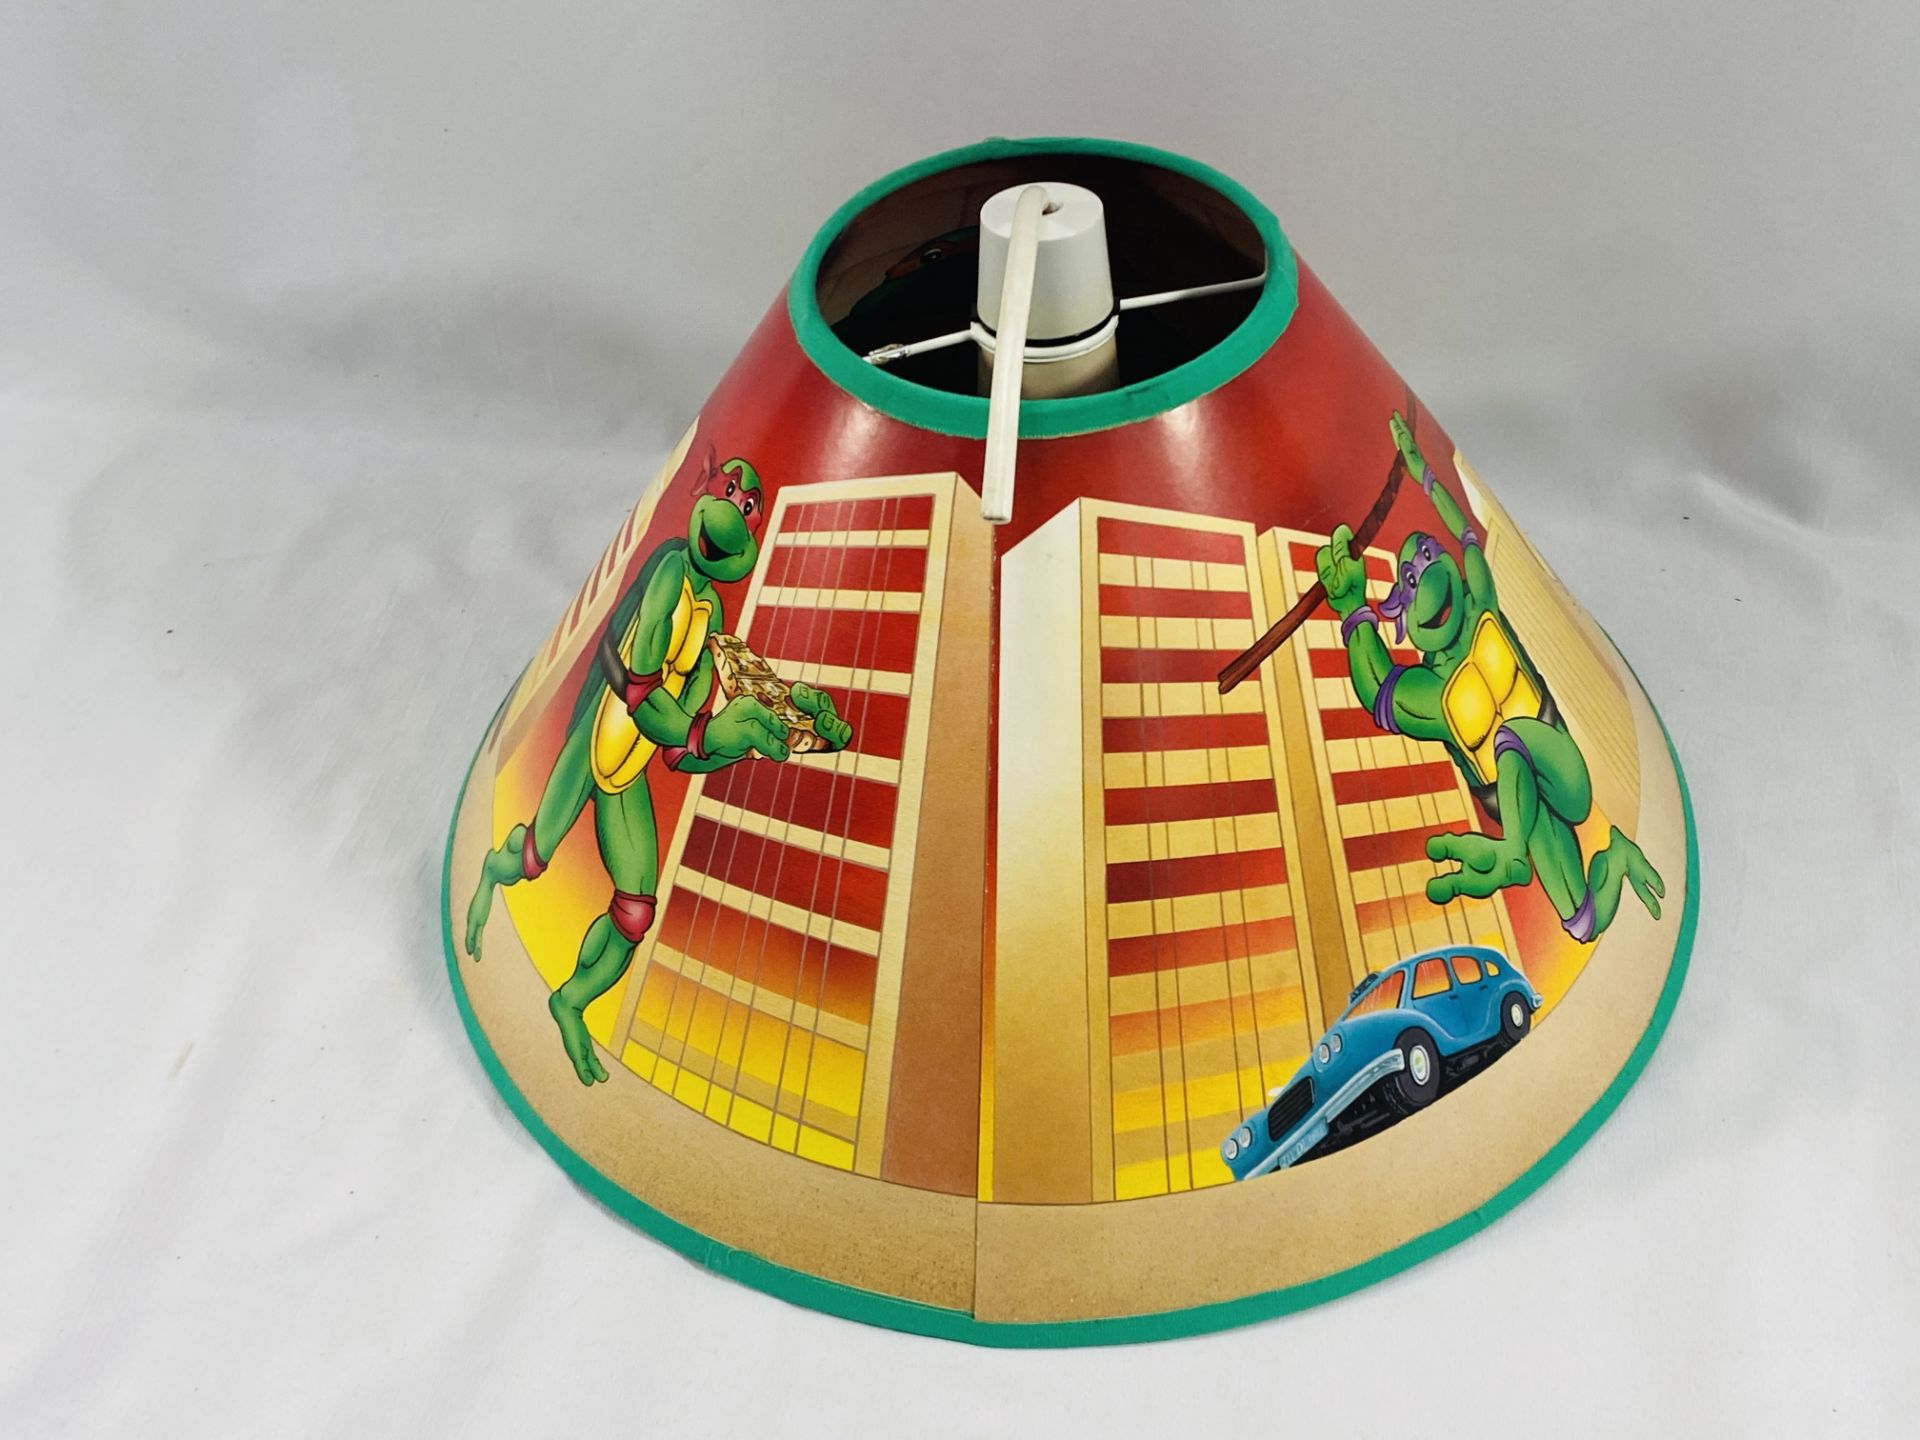 Two Teenage Mutant Ninja Turtles games and a lampshade - Image 6 of 7